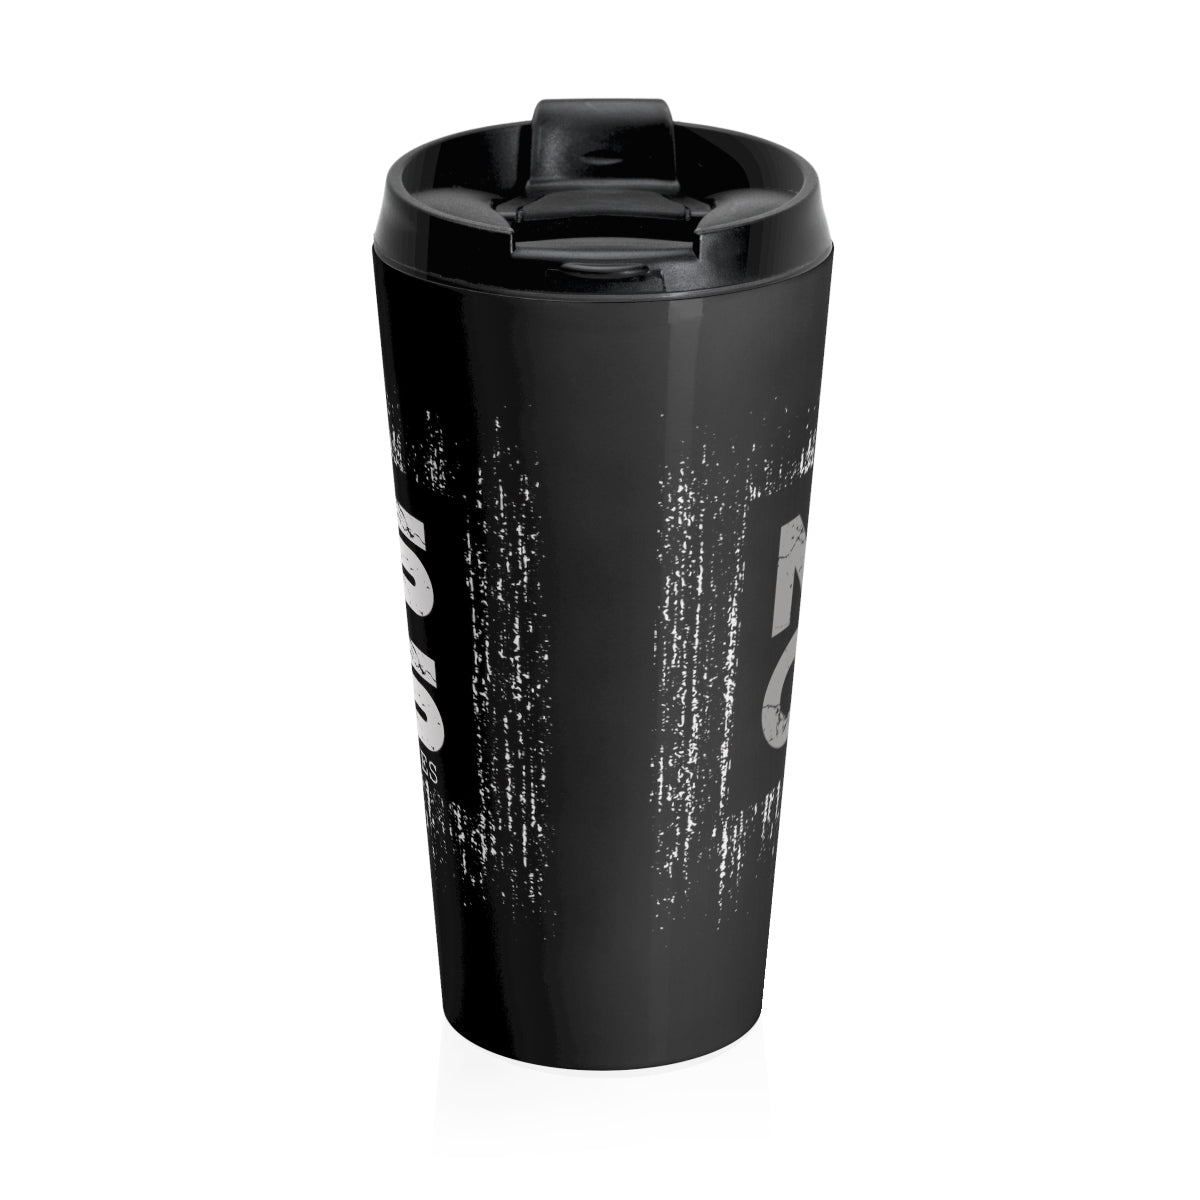 No Rules/ Limits/Gray/ Black/ Stainless Steel Travel Mug